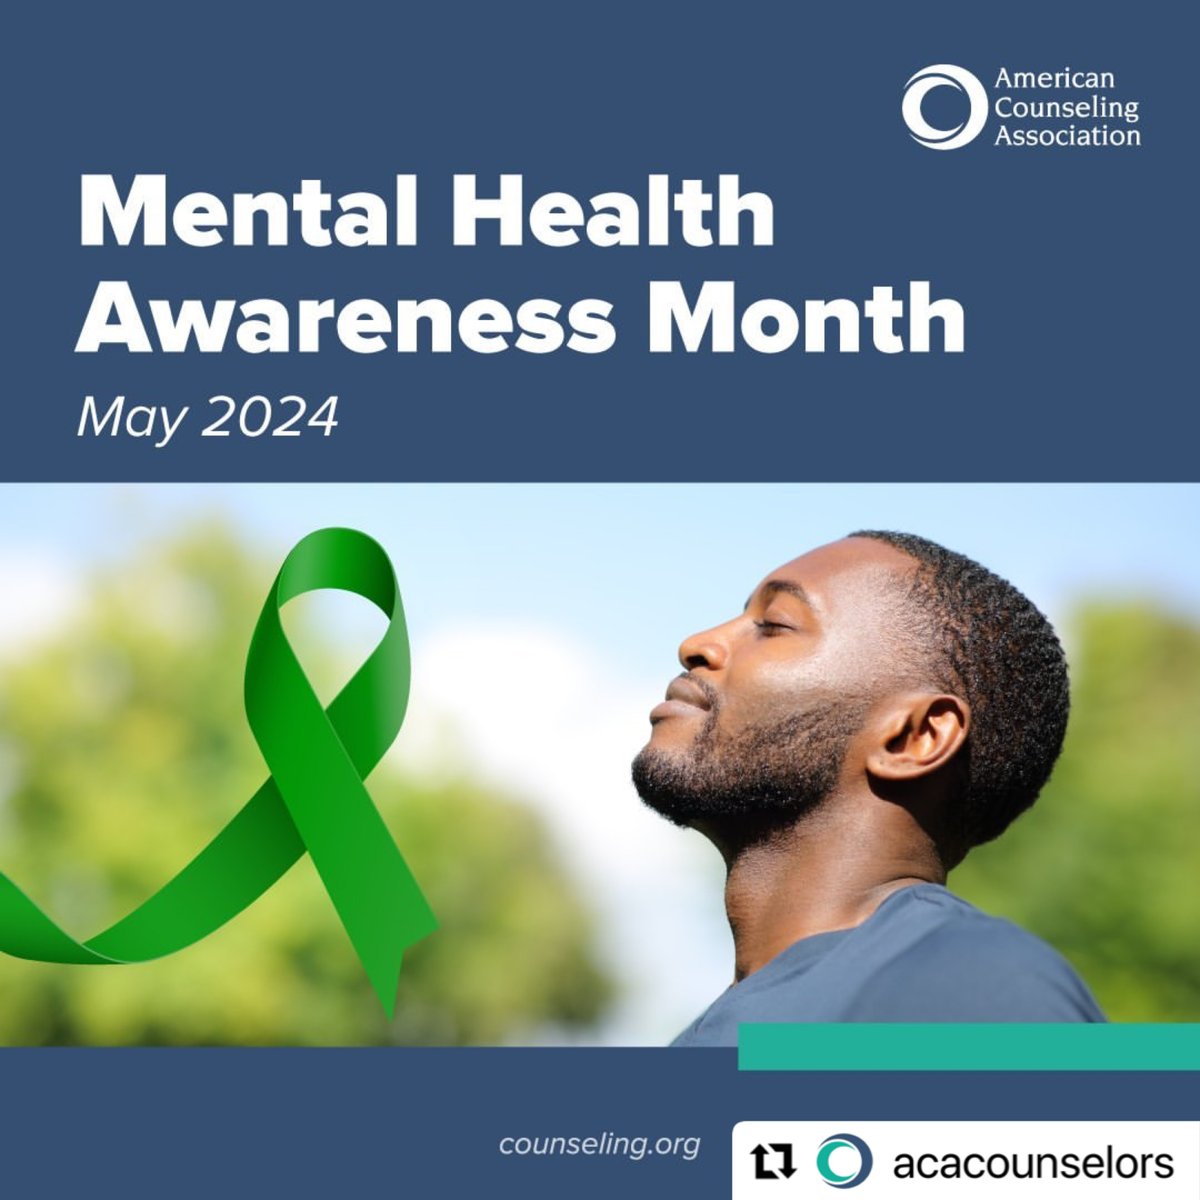 1 in 5 people will experience a mental illness over the course of their lives, everyone will face challenges that can and will affect their mental health. During the month of May, explore our resources and tips to help both counselors and the public here: bit.ly/3WlBPzK